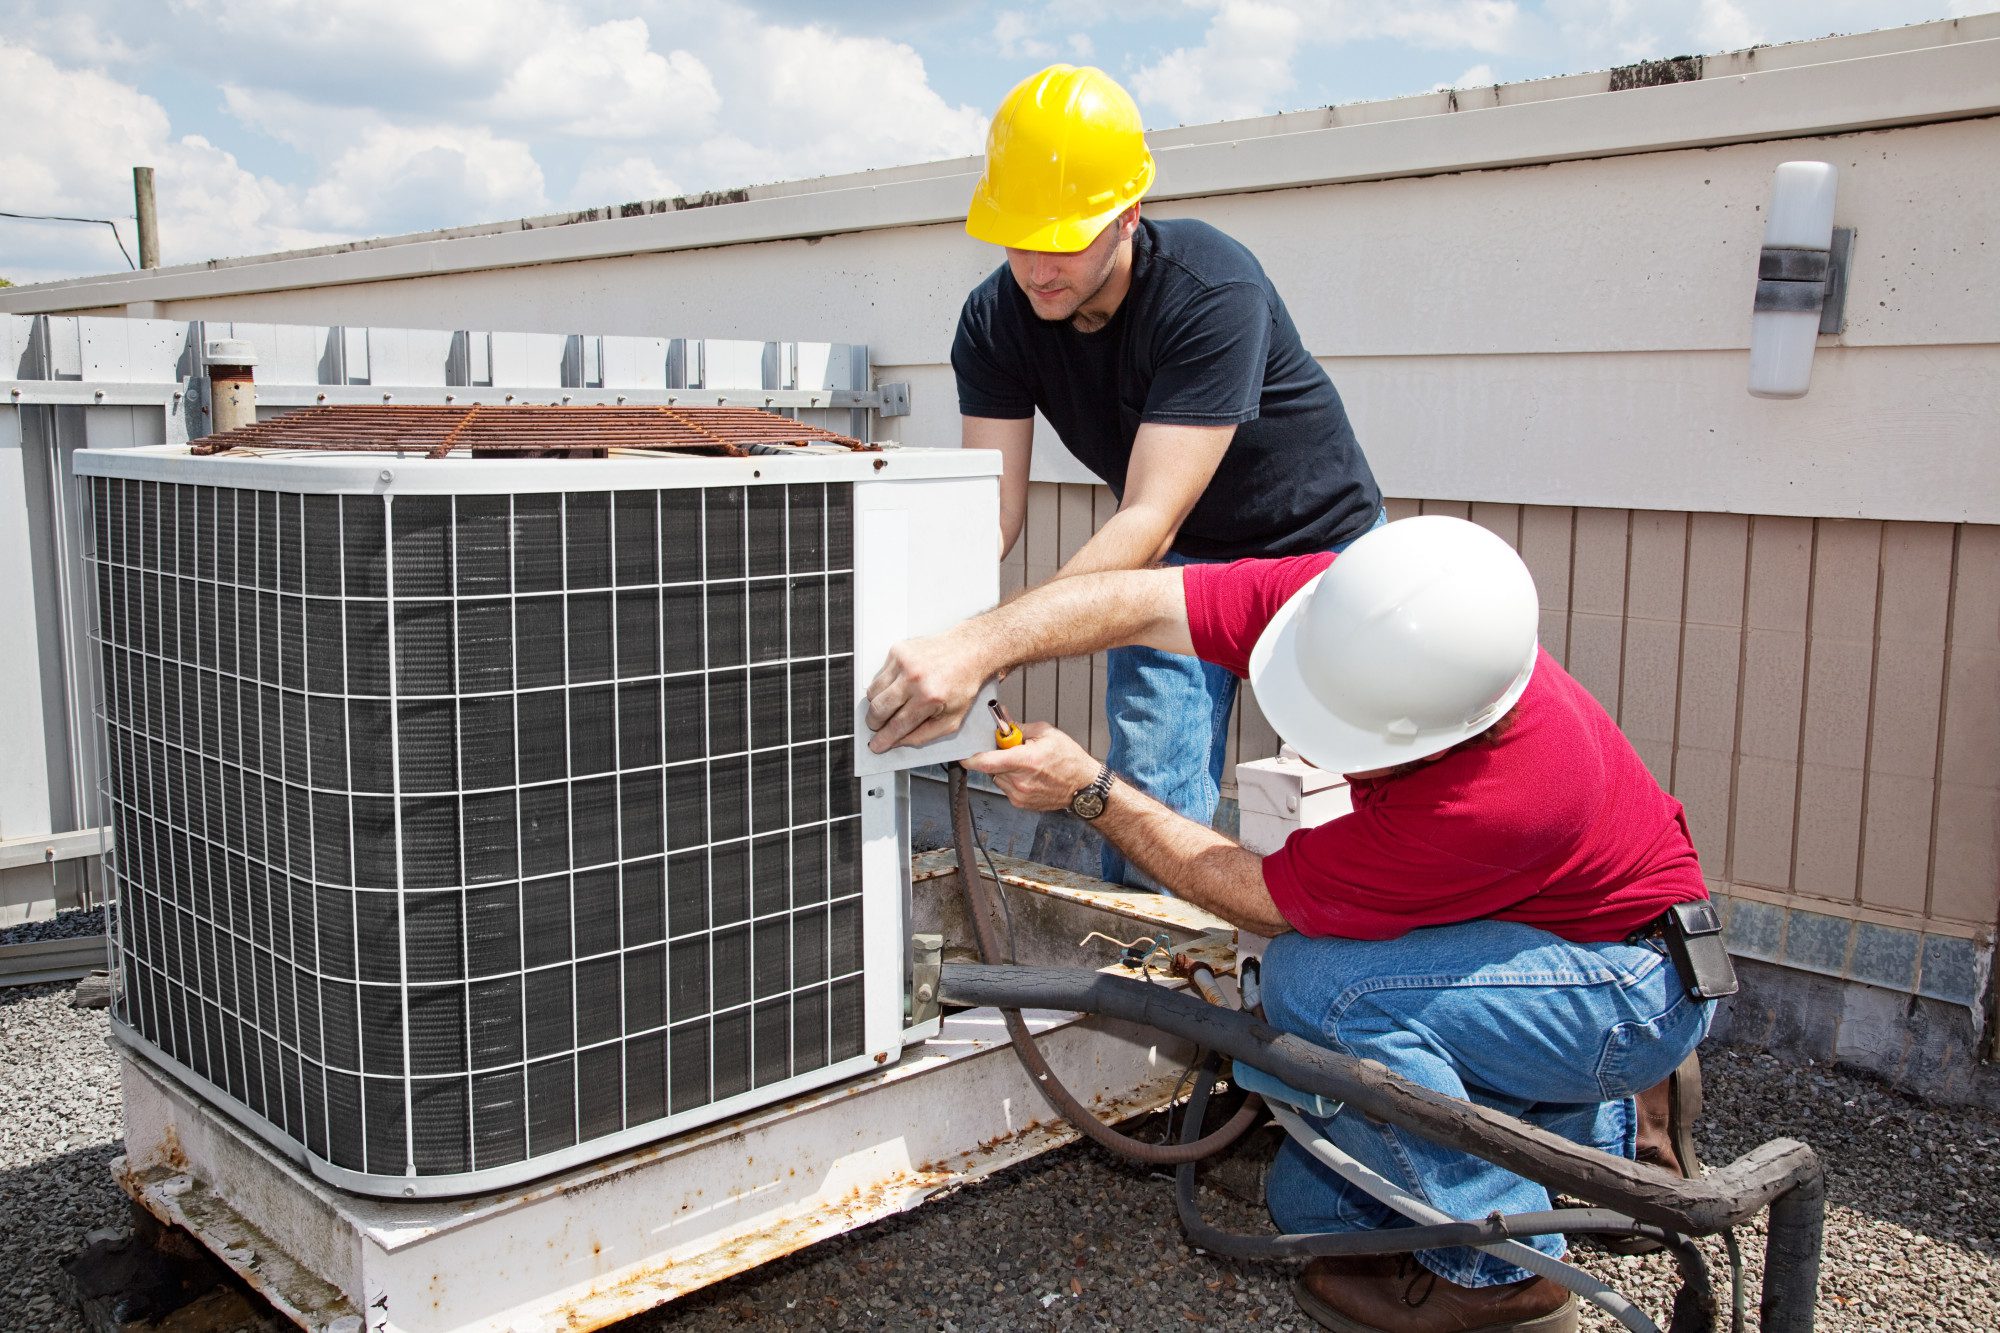 7 Important Hvac Questions to Ask Your Contractor Before Hiring Them